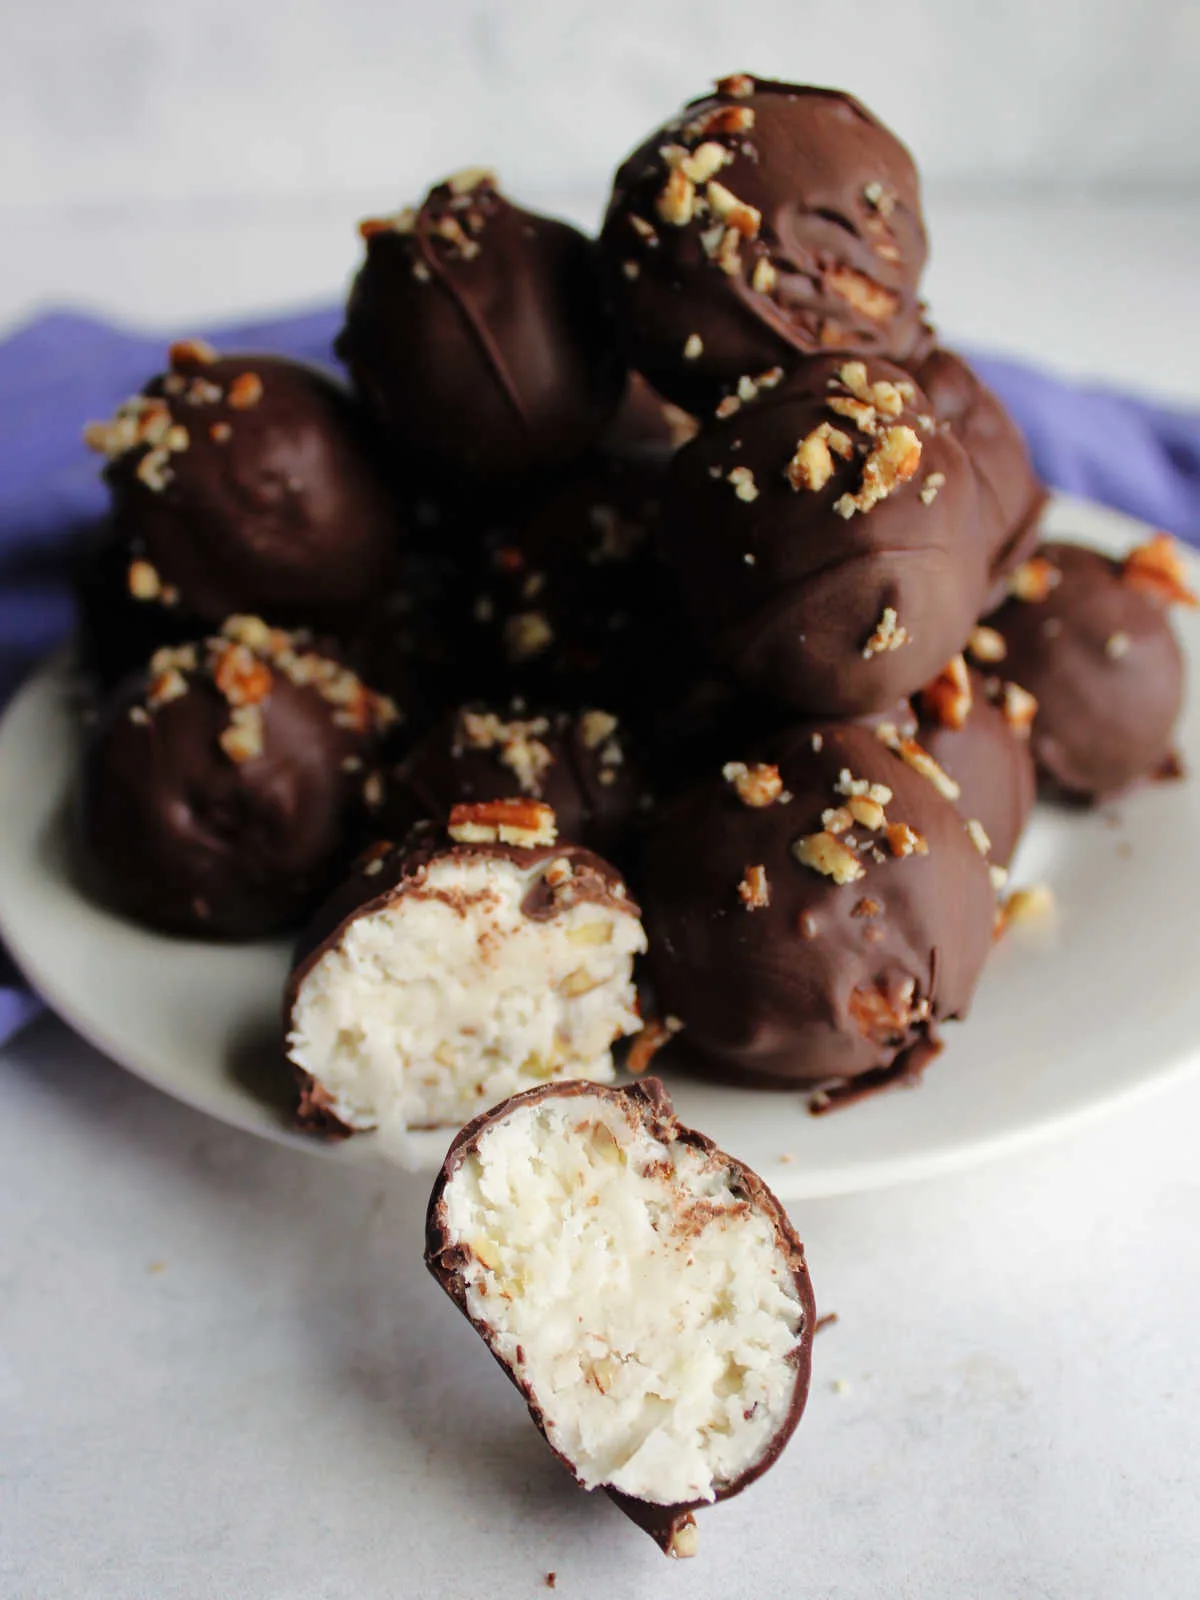 Pile of coconut bon bons topped with pecans in background with a bon bon cut in half in the front, showing the white filling.